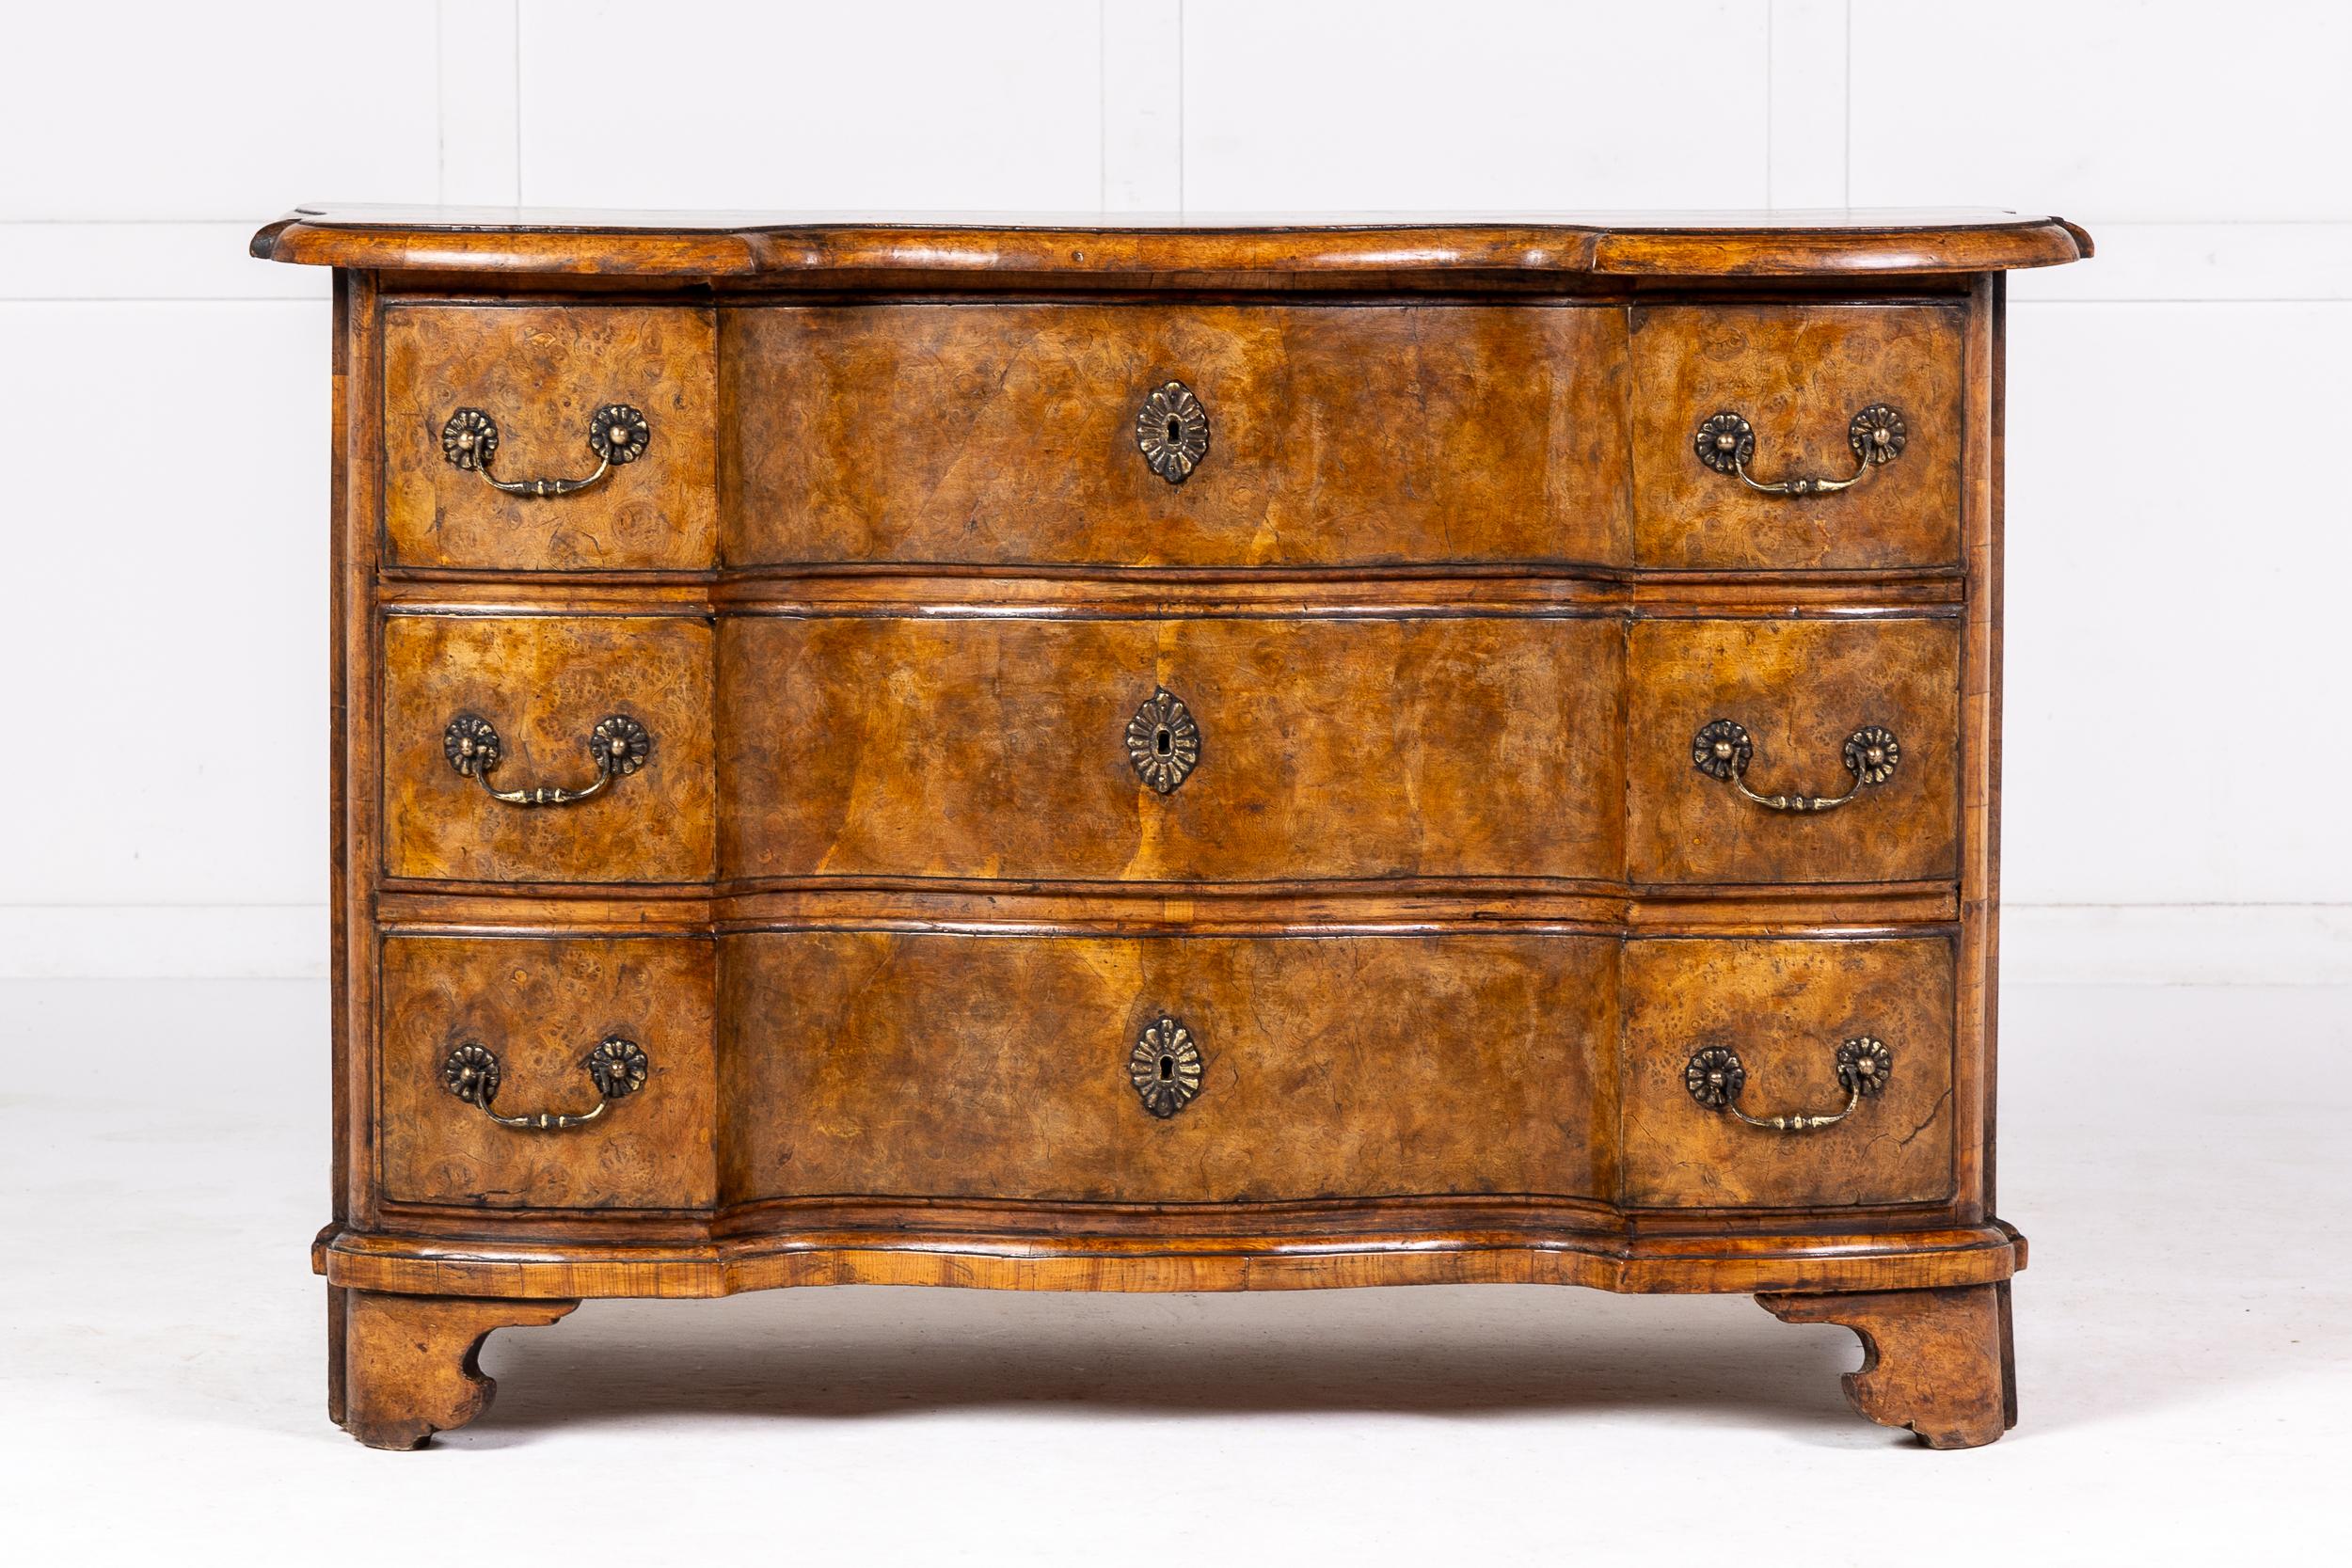 A Very Fine 18th Century German Commode of Drawers of Serpentine Form.

This piece in finely figured burr timber has an inverted serpentine form. The moulded top is of great colour and shape. Both the top and sides employ a very wide crossbanding.